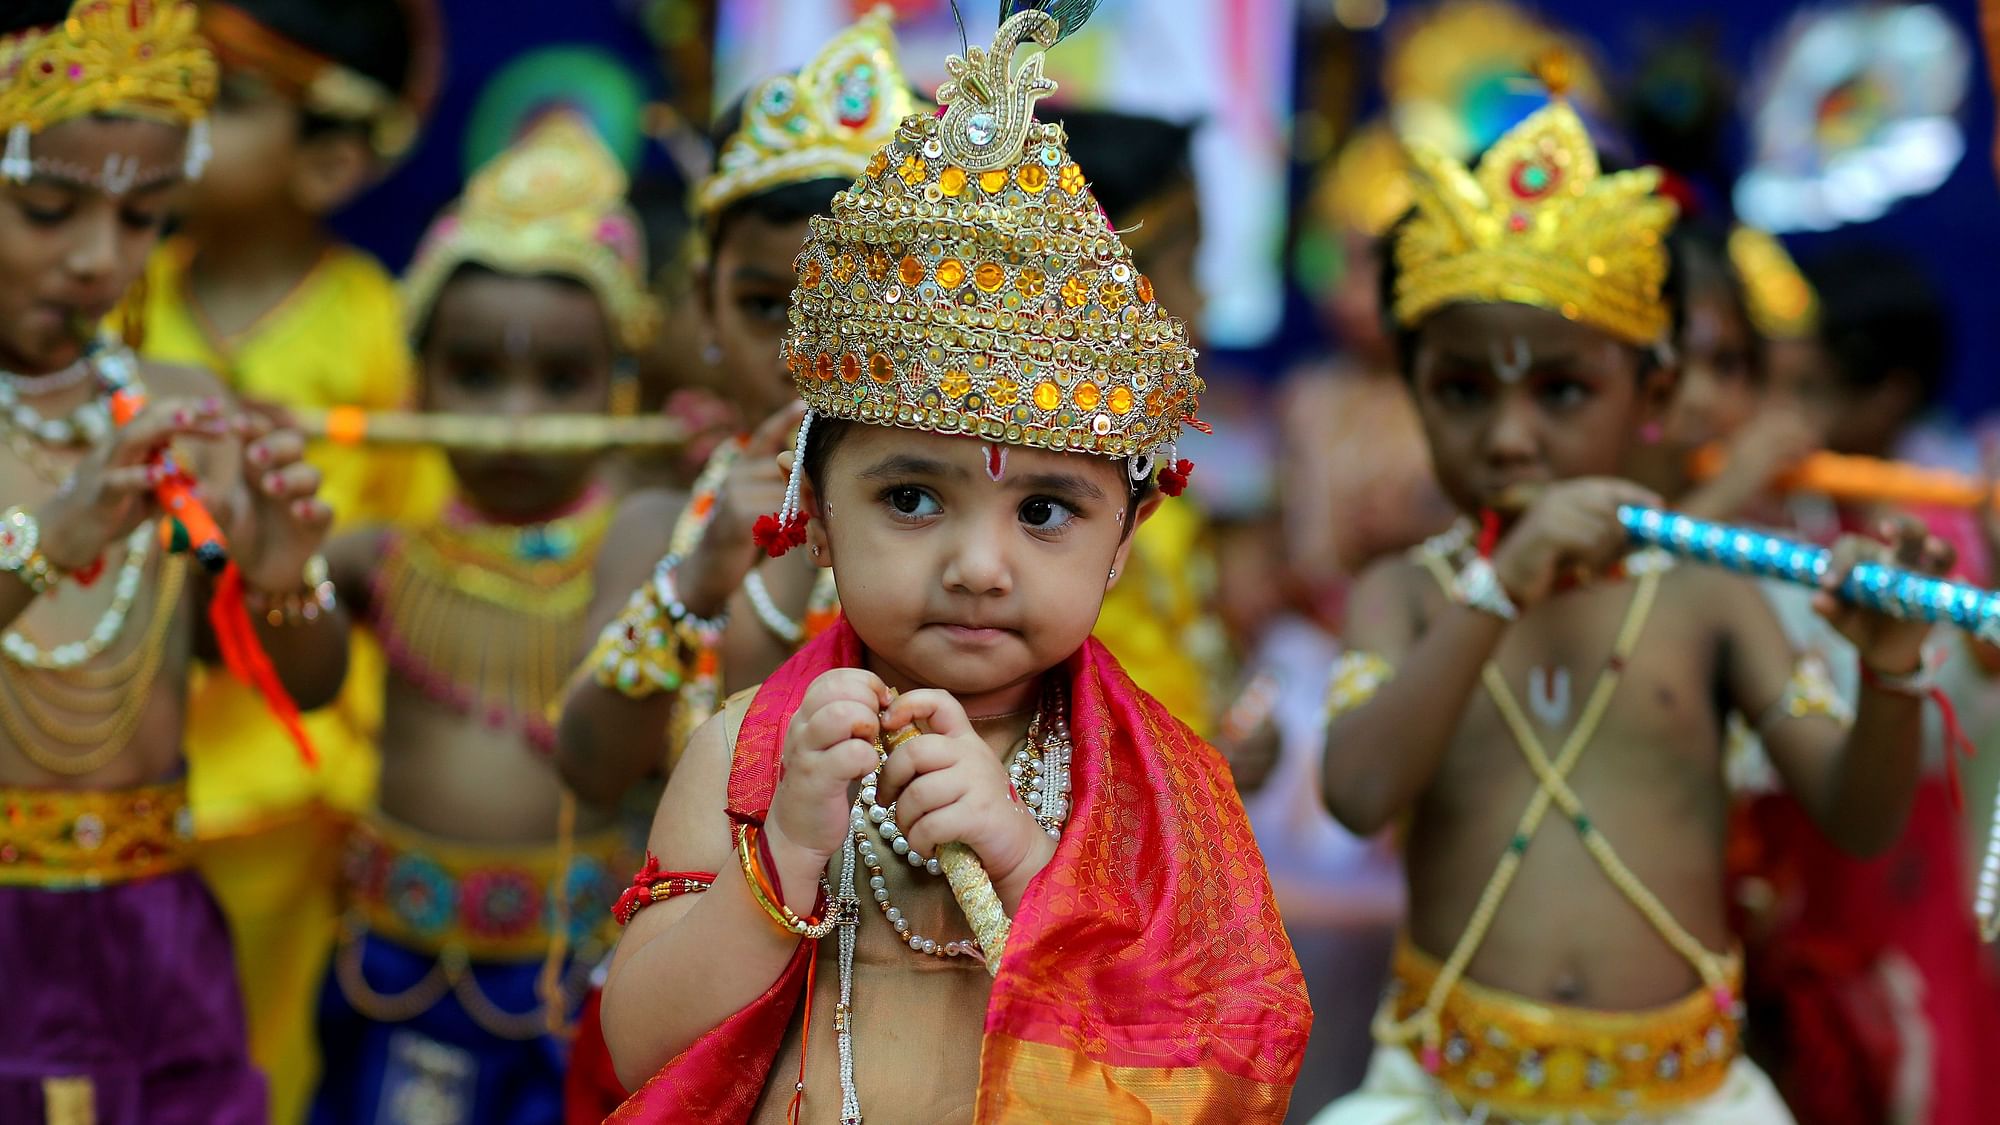 School children dressed up as Lord Krishna on the eve of the festival Janmashtami&nbsp;in Hyderabad on Friday, 23 August.